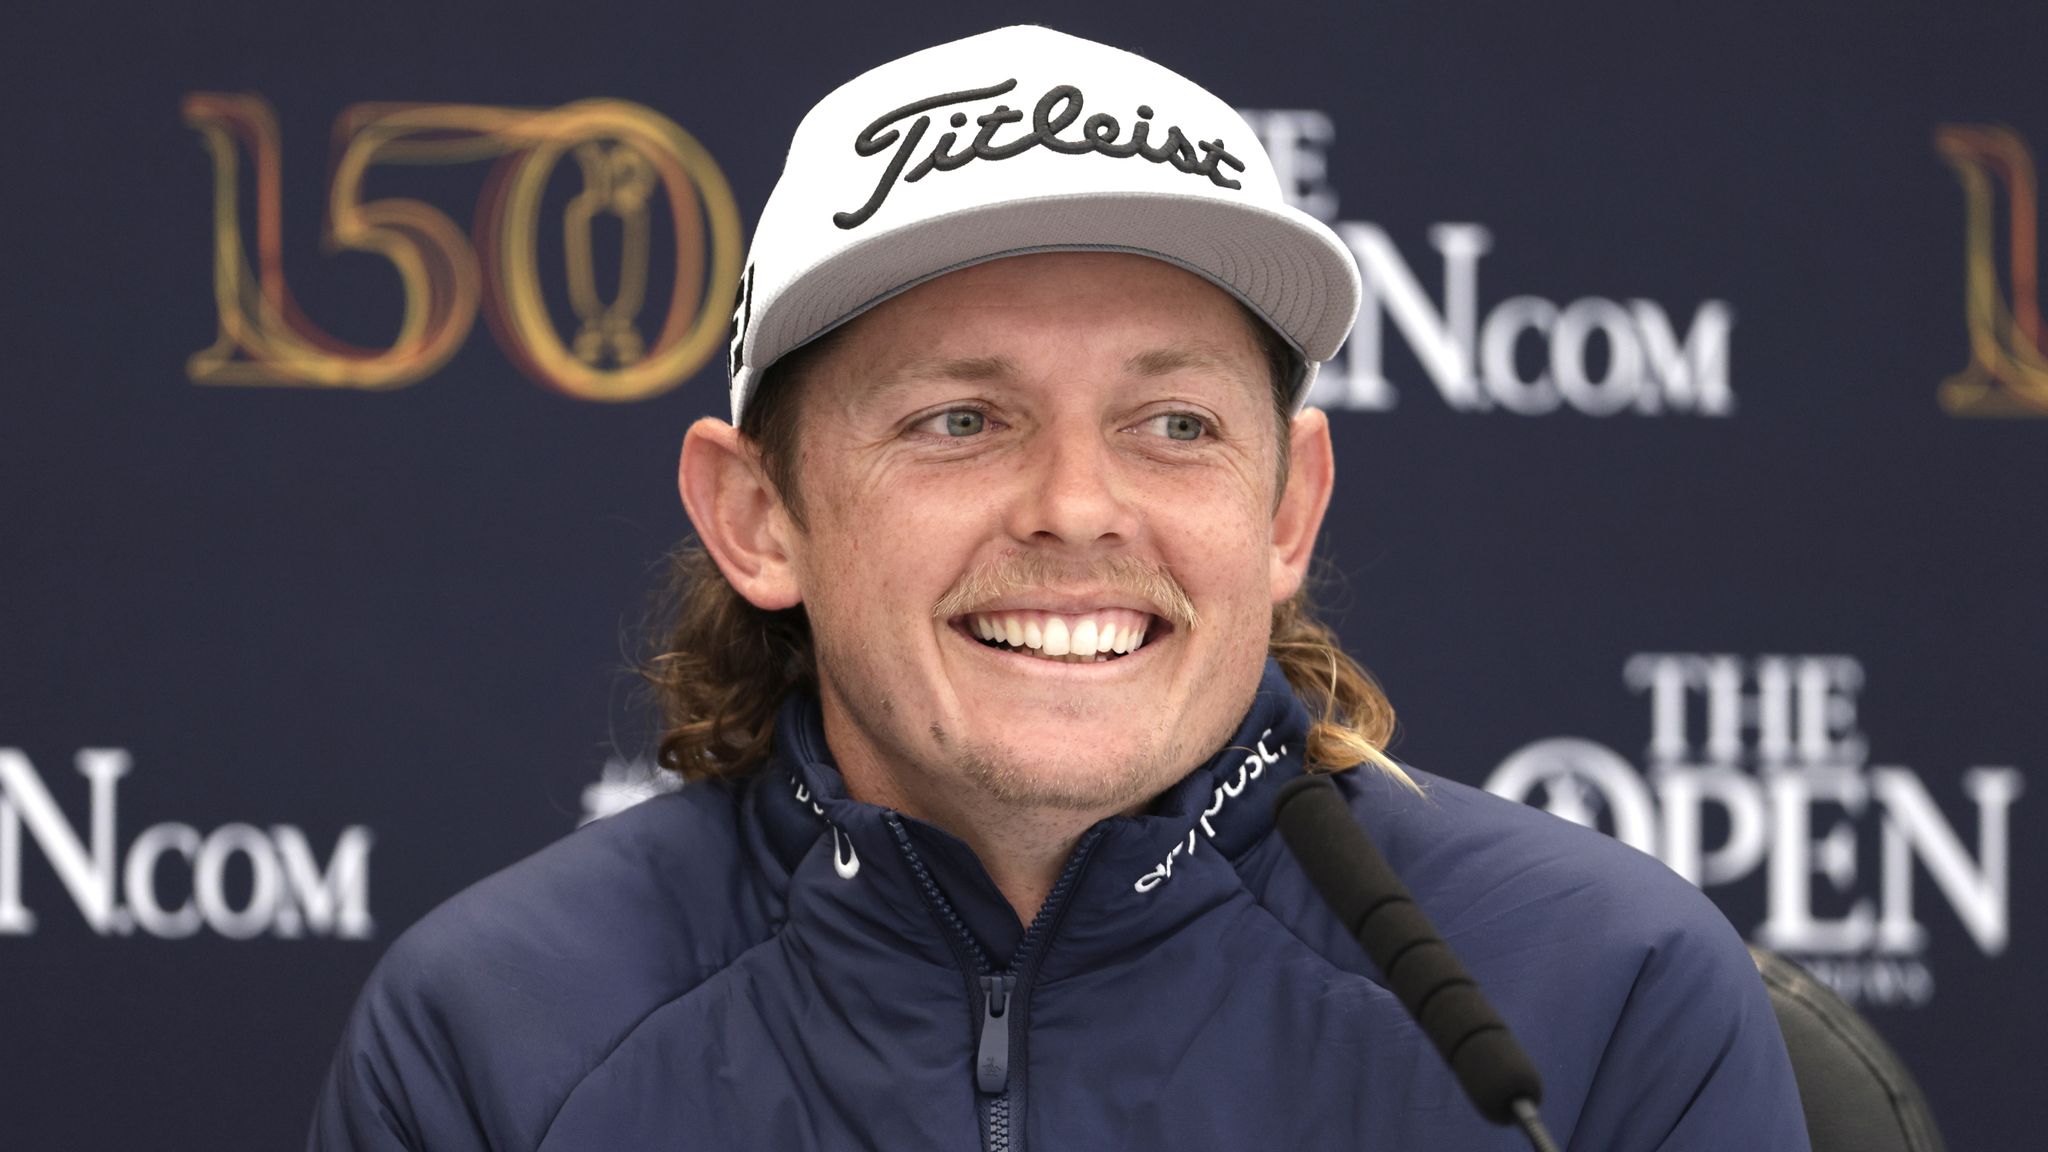 The 150th Open Cameron Smith believes St Andrews is his best chance to win an Open amid impressive form Golf News Sky Sports